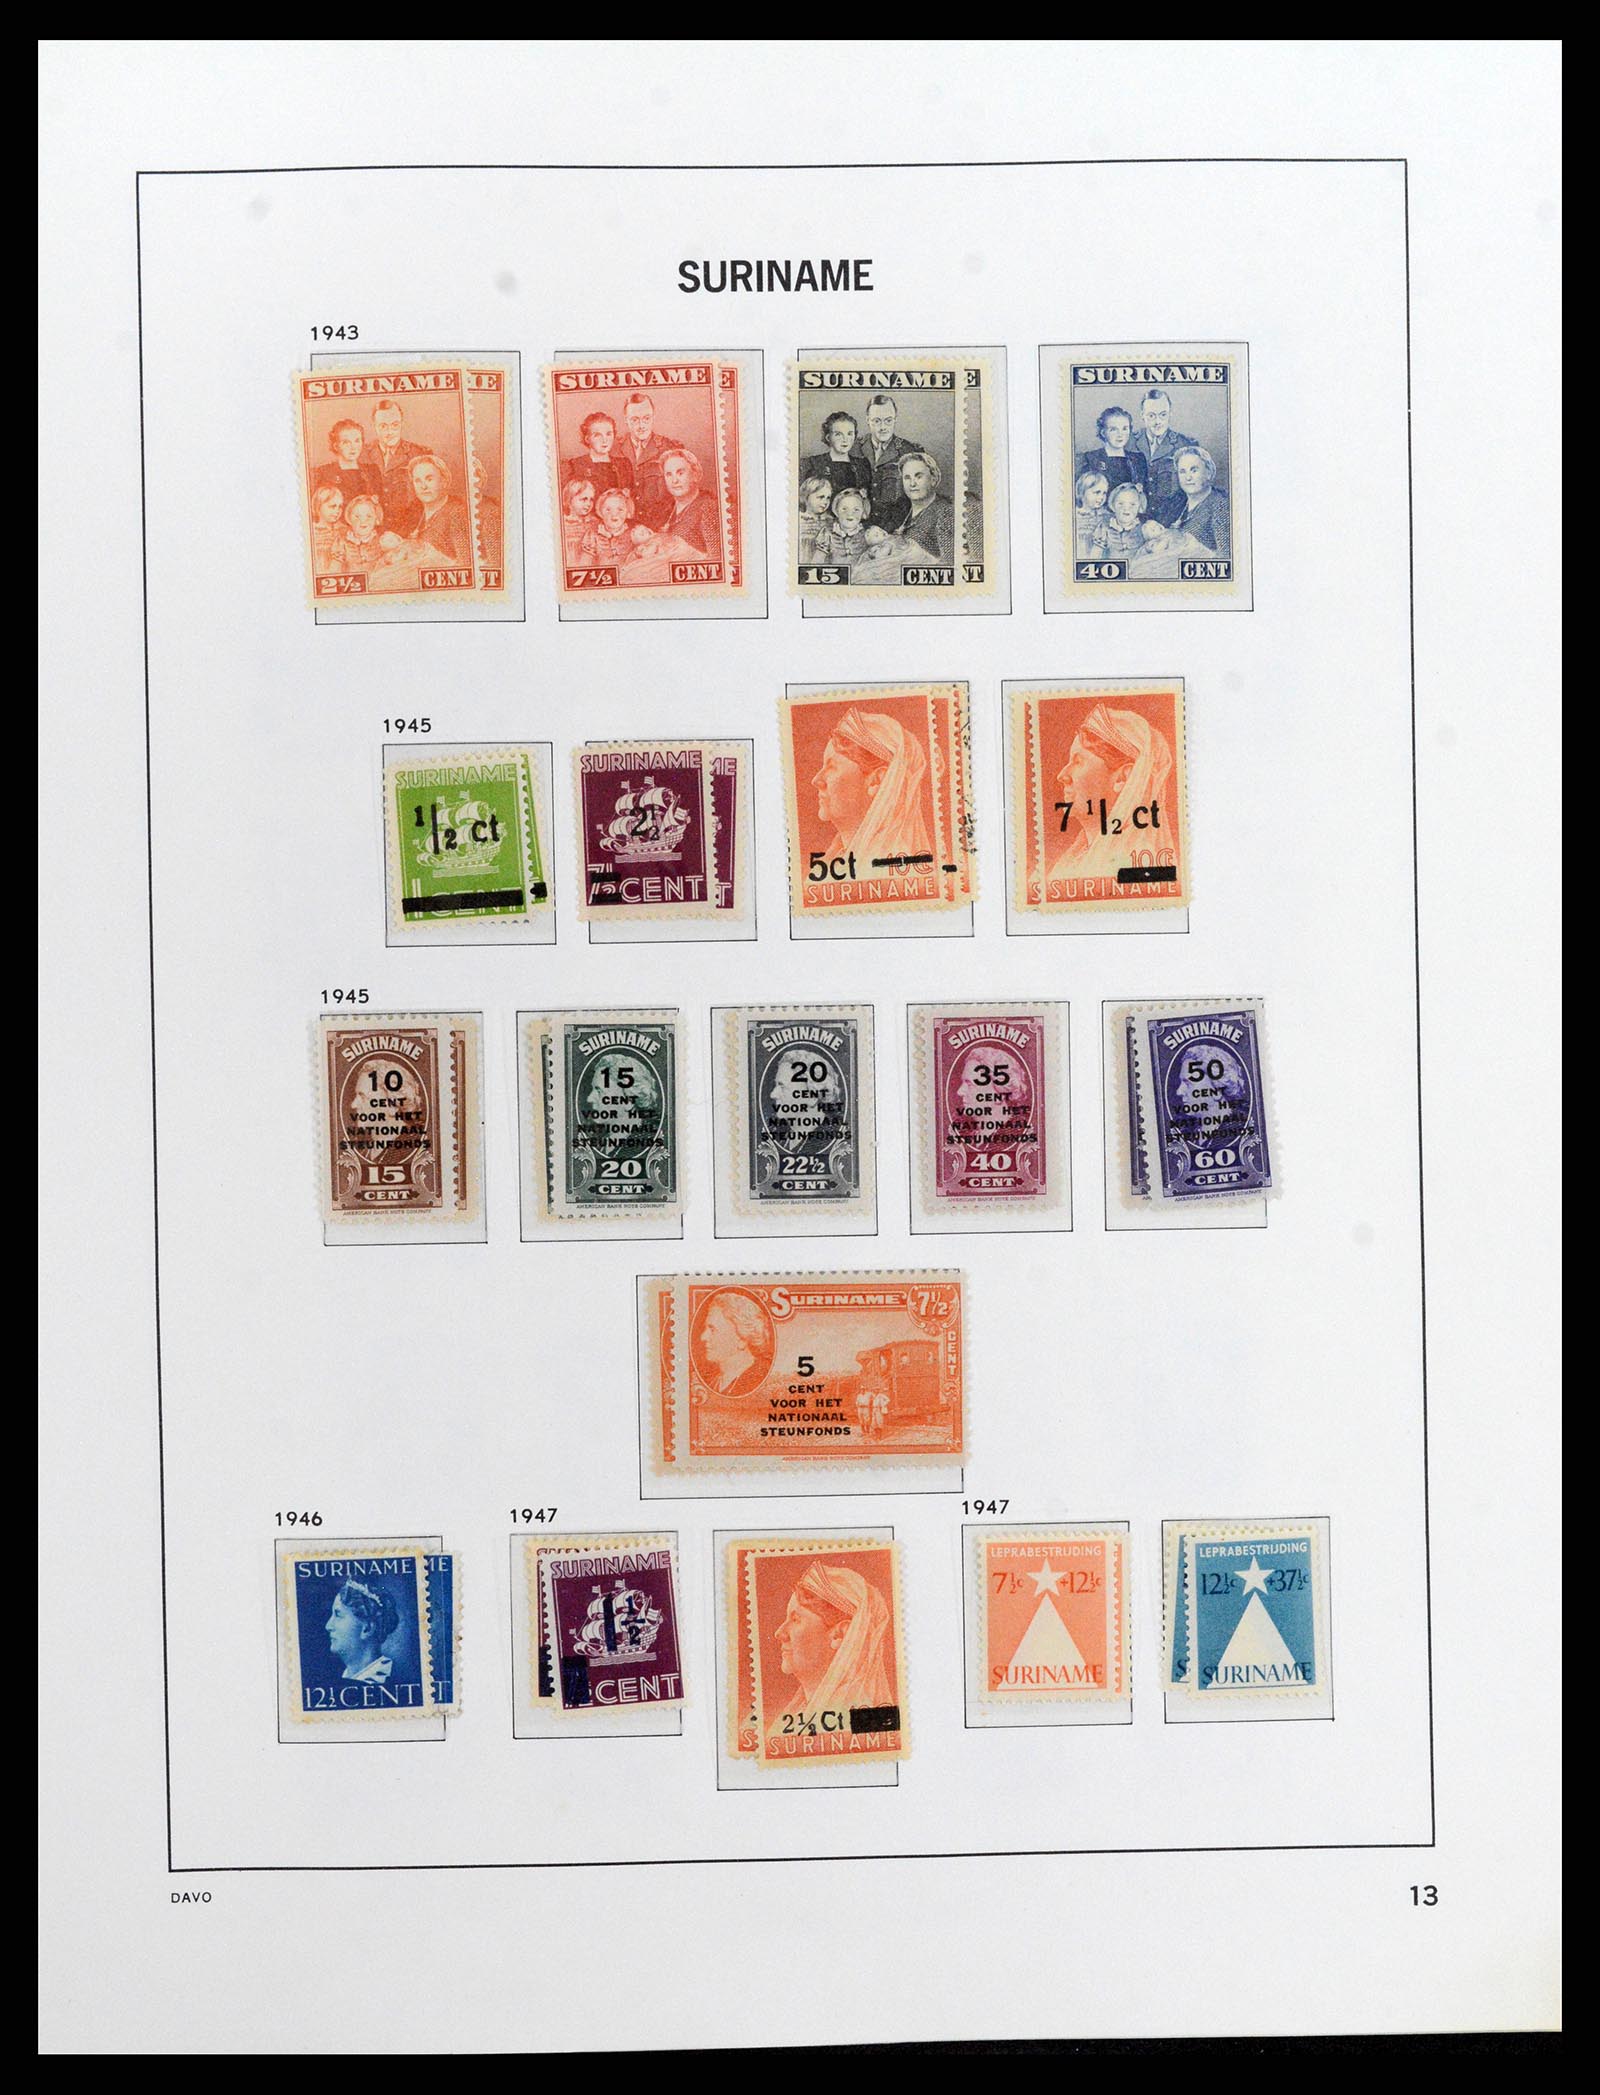 37843 014 - Stamp Collection 37843 Suriname 1873-2008.